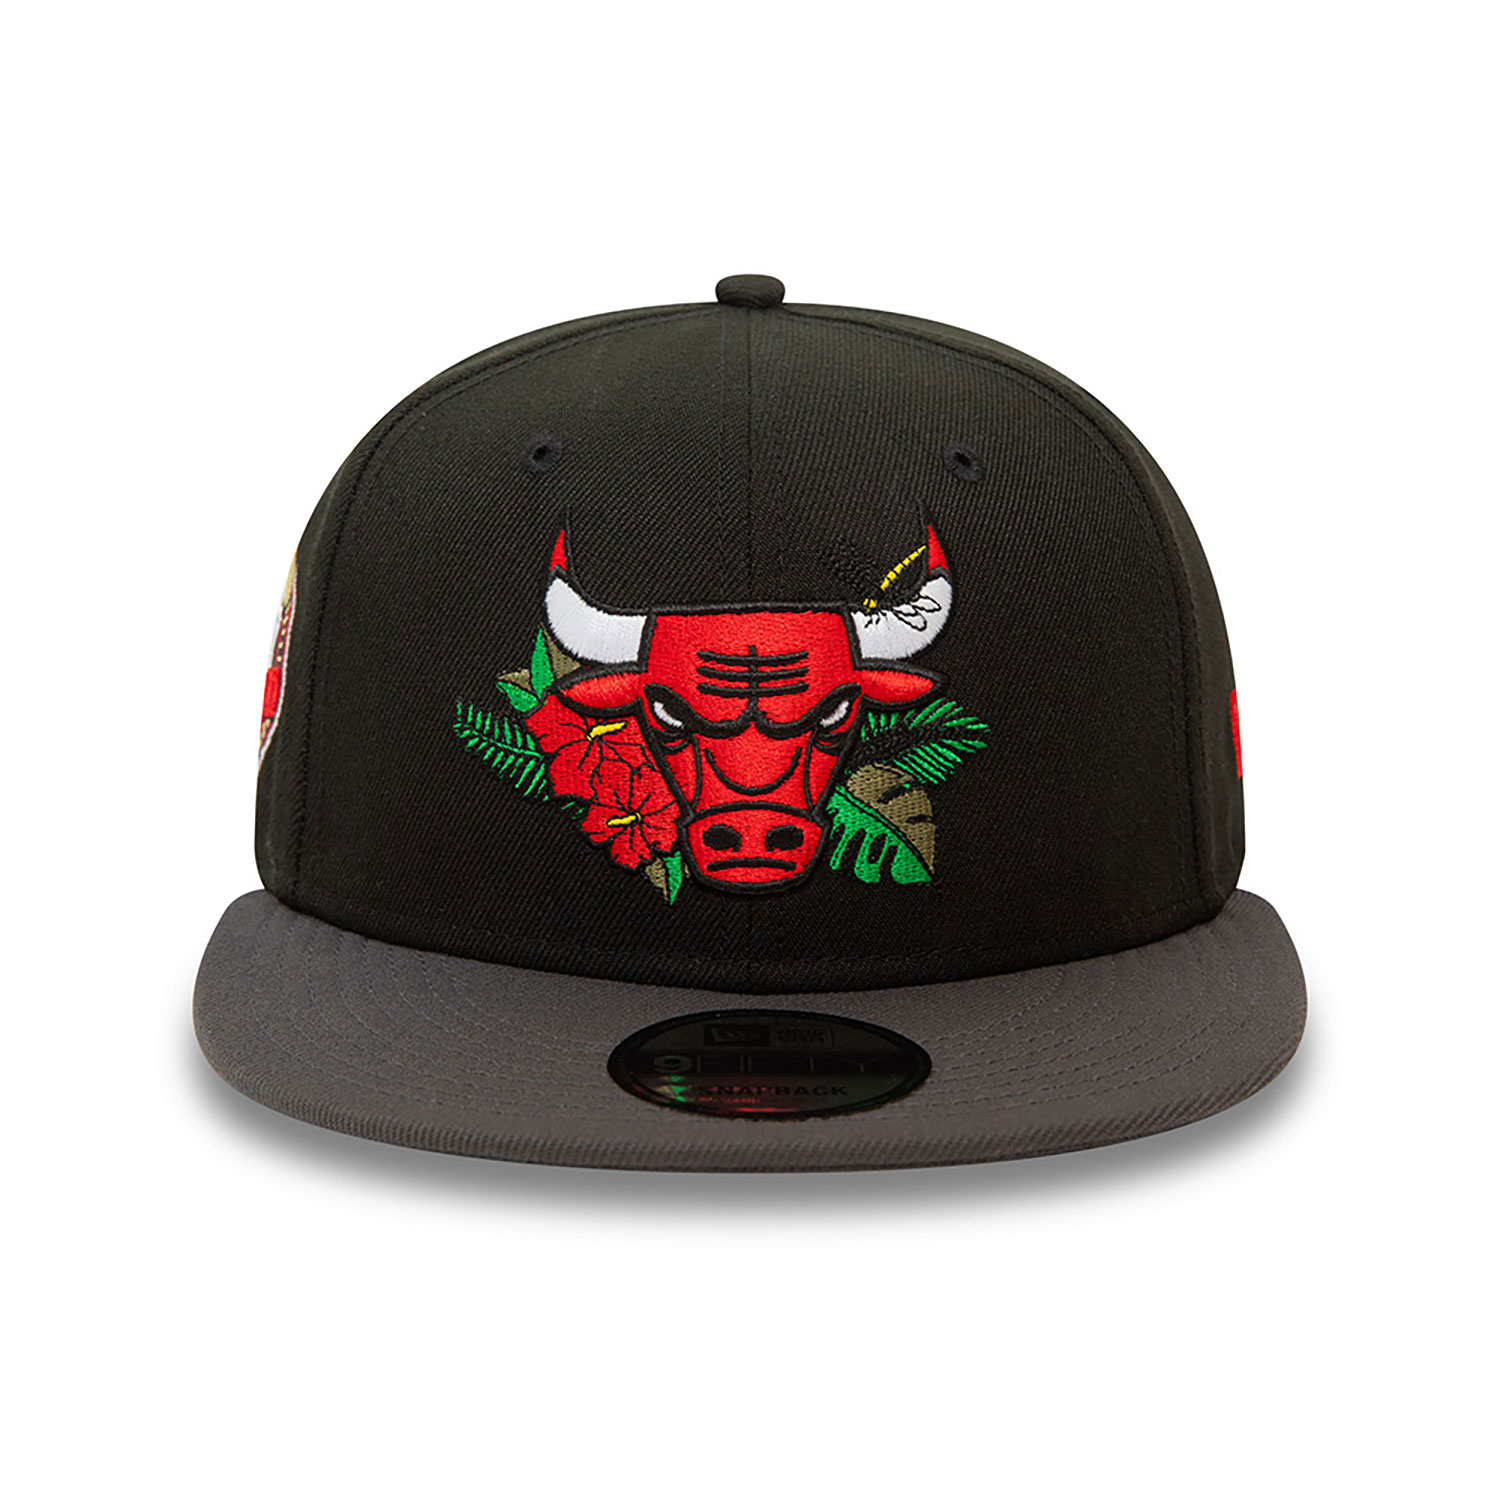 Casquette 9FIFTY Snapback Chicago Bulls NBA Floral 